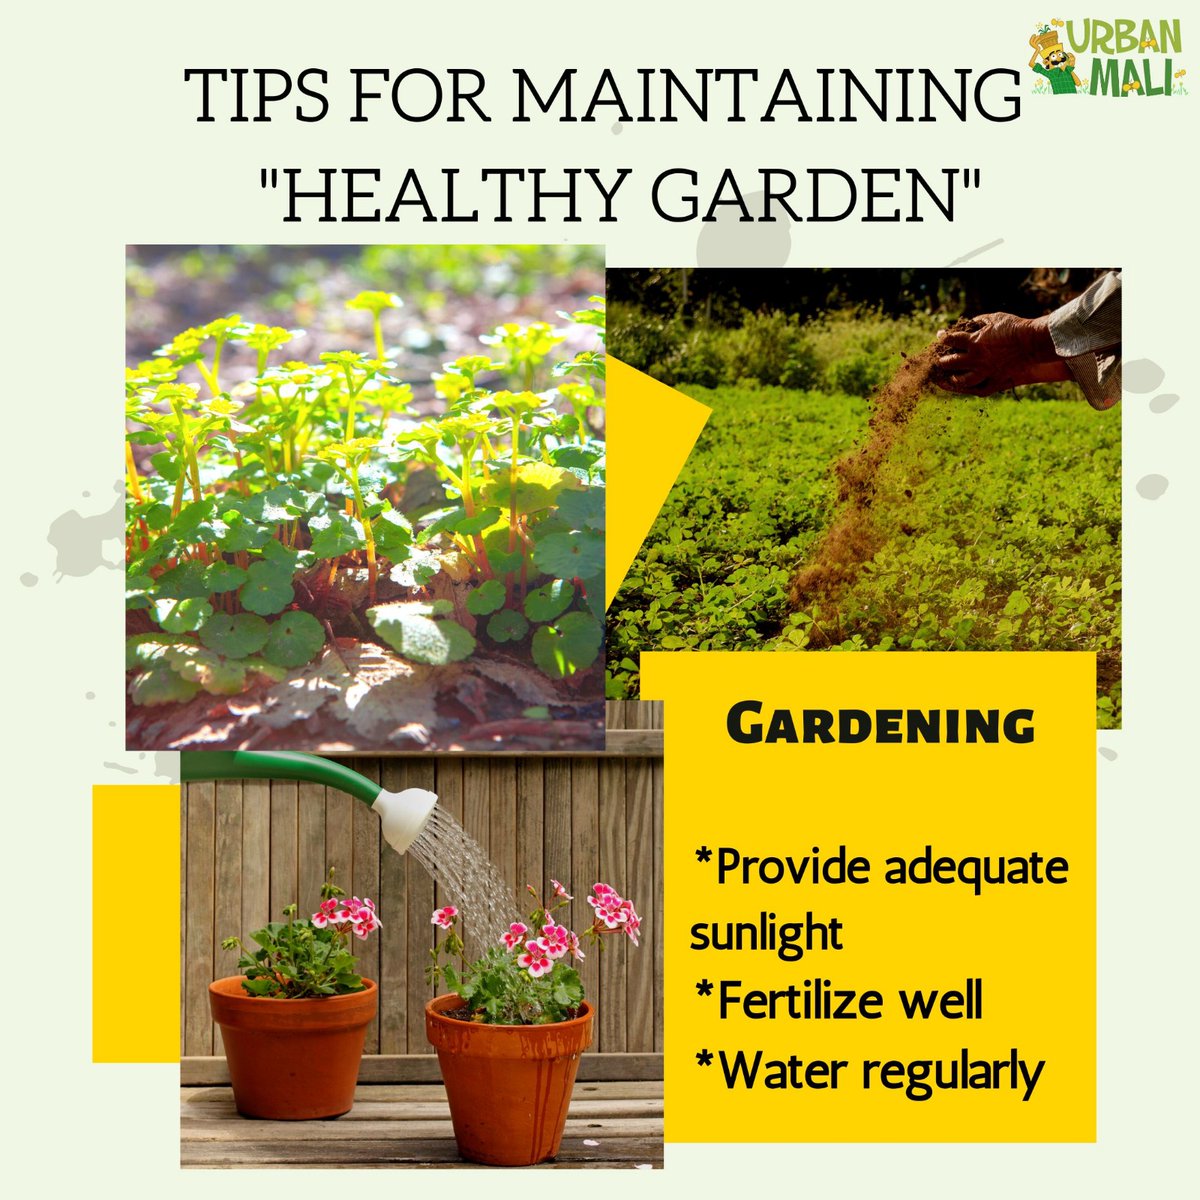 Maintaining a healthy garden is essential for producing beautiful flowers, lush foliage, and delicious fruits and vegetables. 

#plantlovers#plantparents#plantcommunity#planter#plantfacts#planttips #healthygarden#urbangardening#homegardening#urbanmali